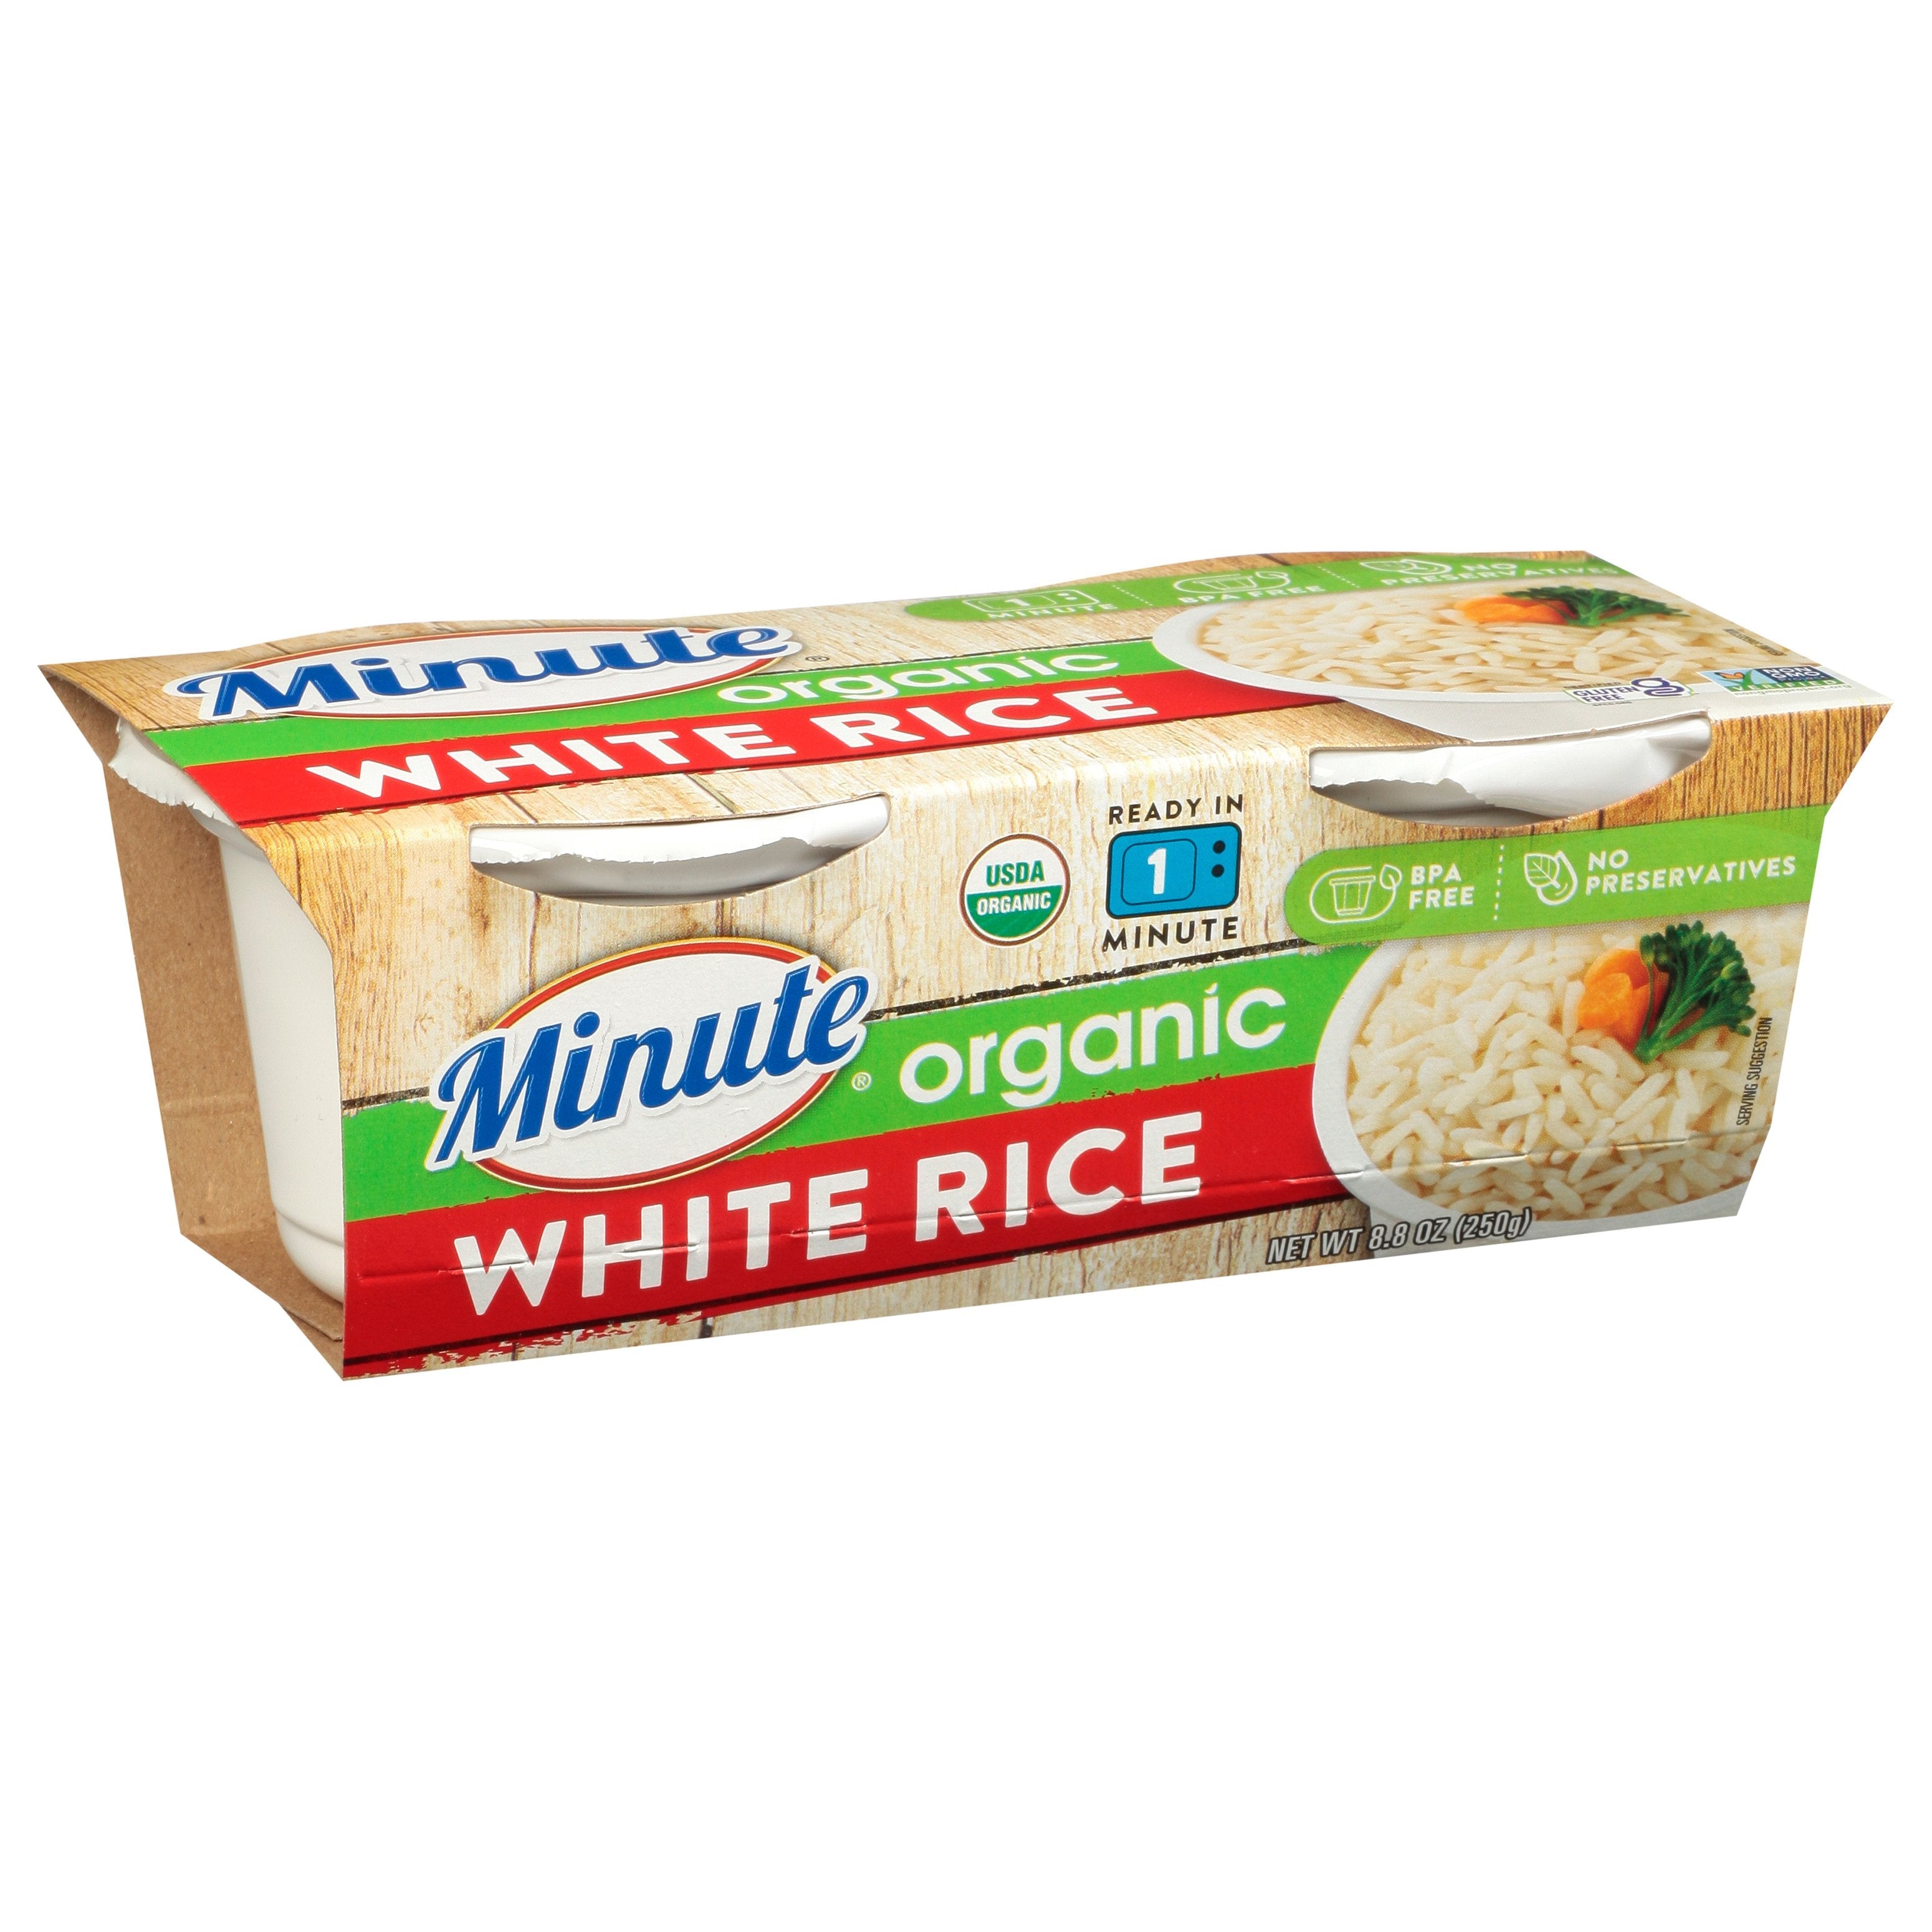 Minute Ready to Serve White Rice, Gluten Free, Non-GMO, No Preservatives,  8.8-Ounce (Pack of 2 BPA-Free Cups) : Packaged Rice Bowls : Grocery &  Gourmet Food 